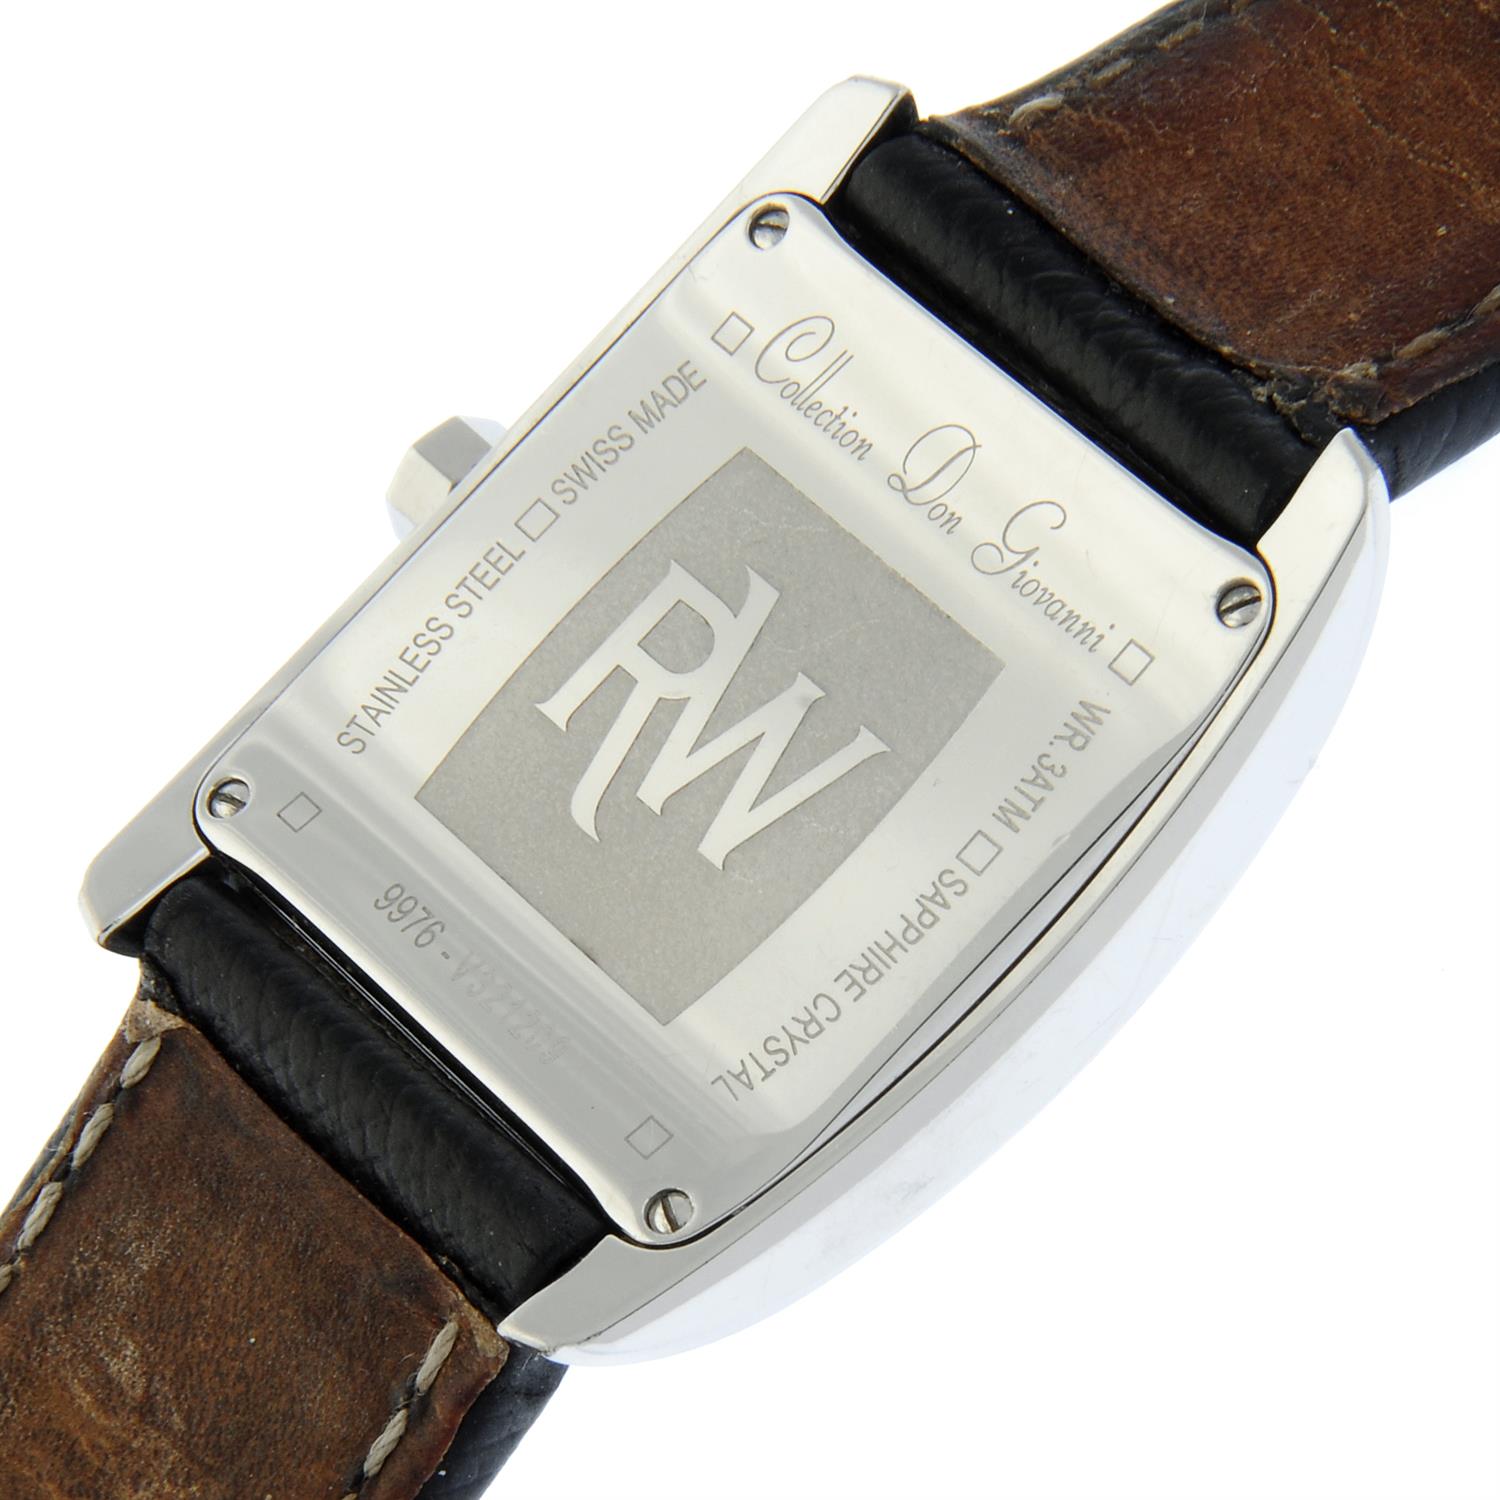 Raymond Weil - a Don Giavanni watch, 32mm. - Image 4 of 4